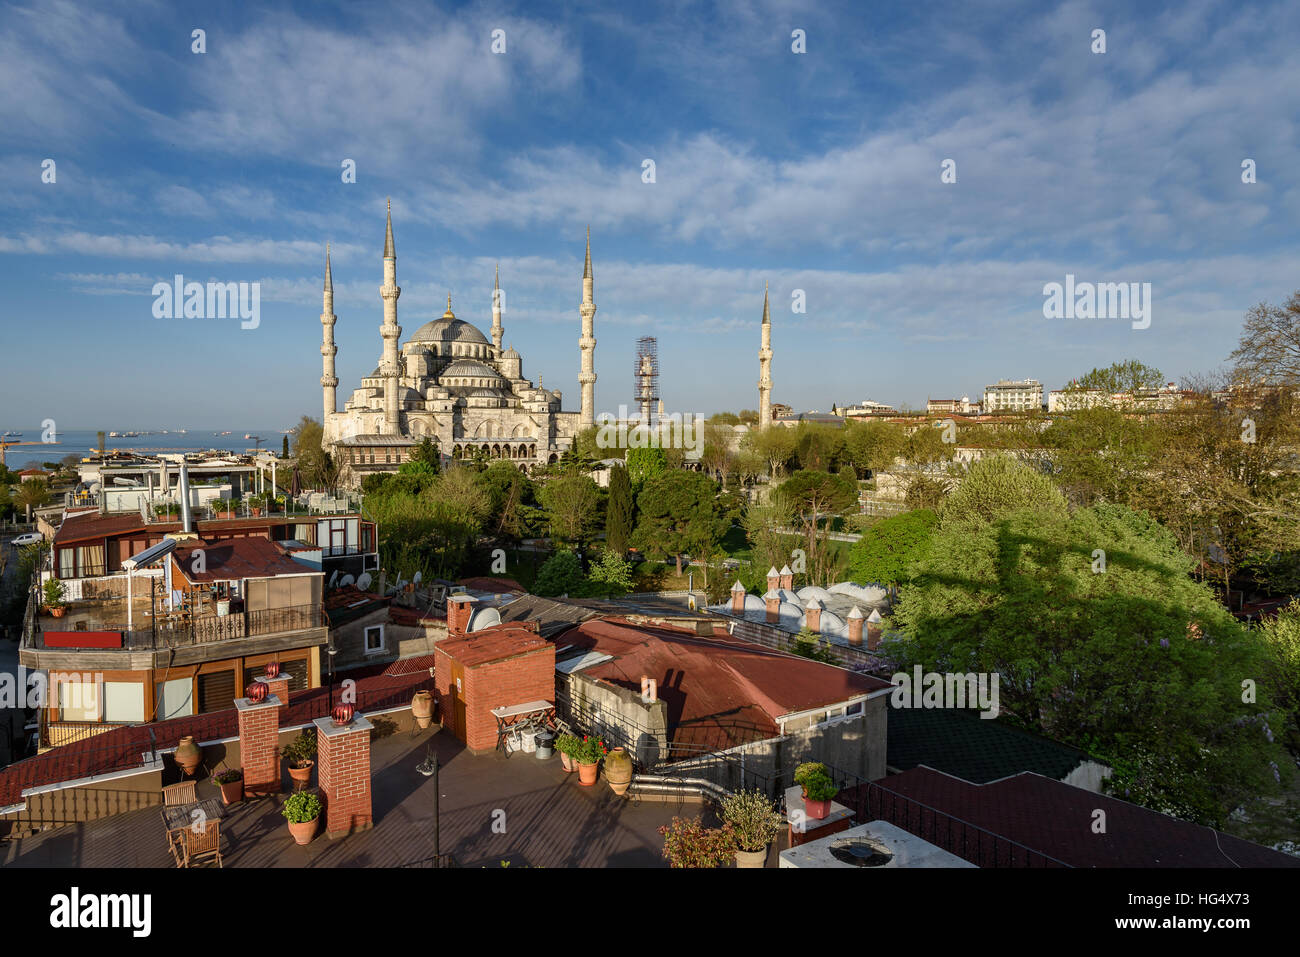 Sultanmehmet mosque also know as blue mosque located in Istanbul Turkey. Stock Photo